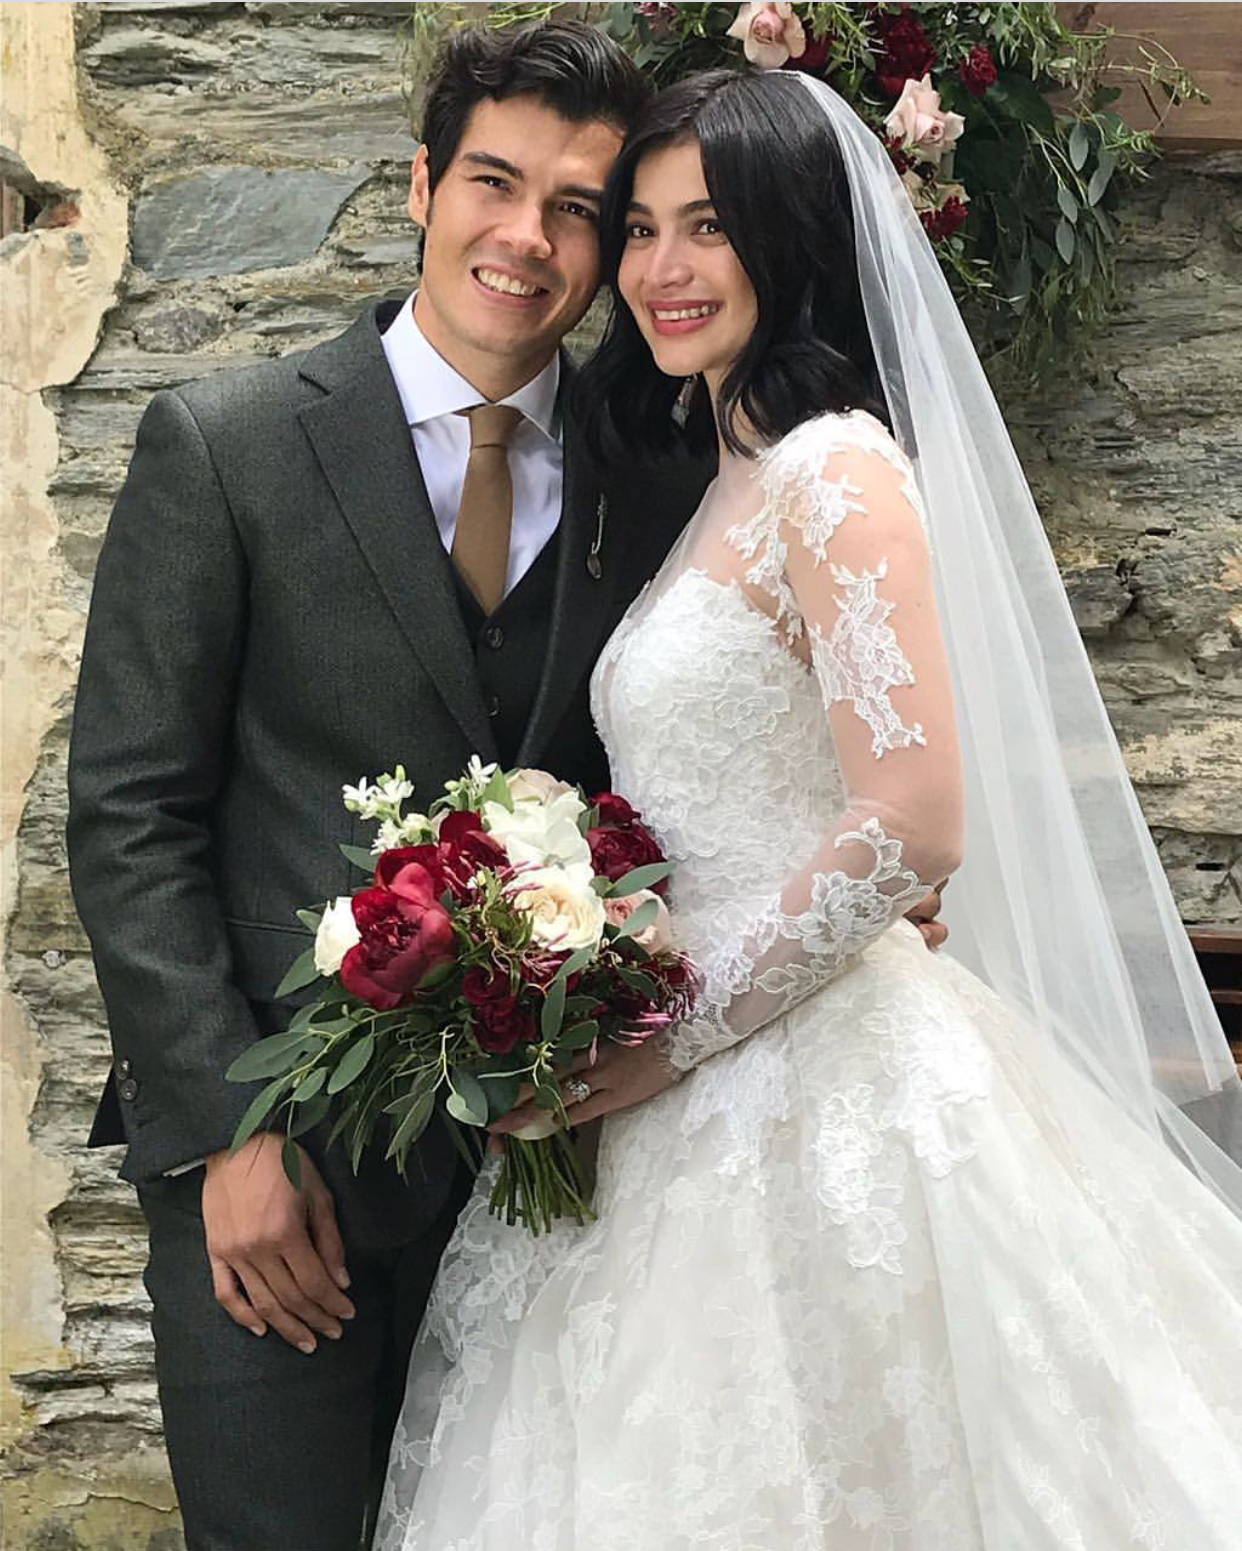 Anne Curtis wore boots: Inside the Heussaffs' stylish and scenic wedding, Inquirer Lifestyle